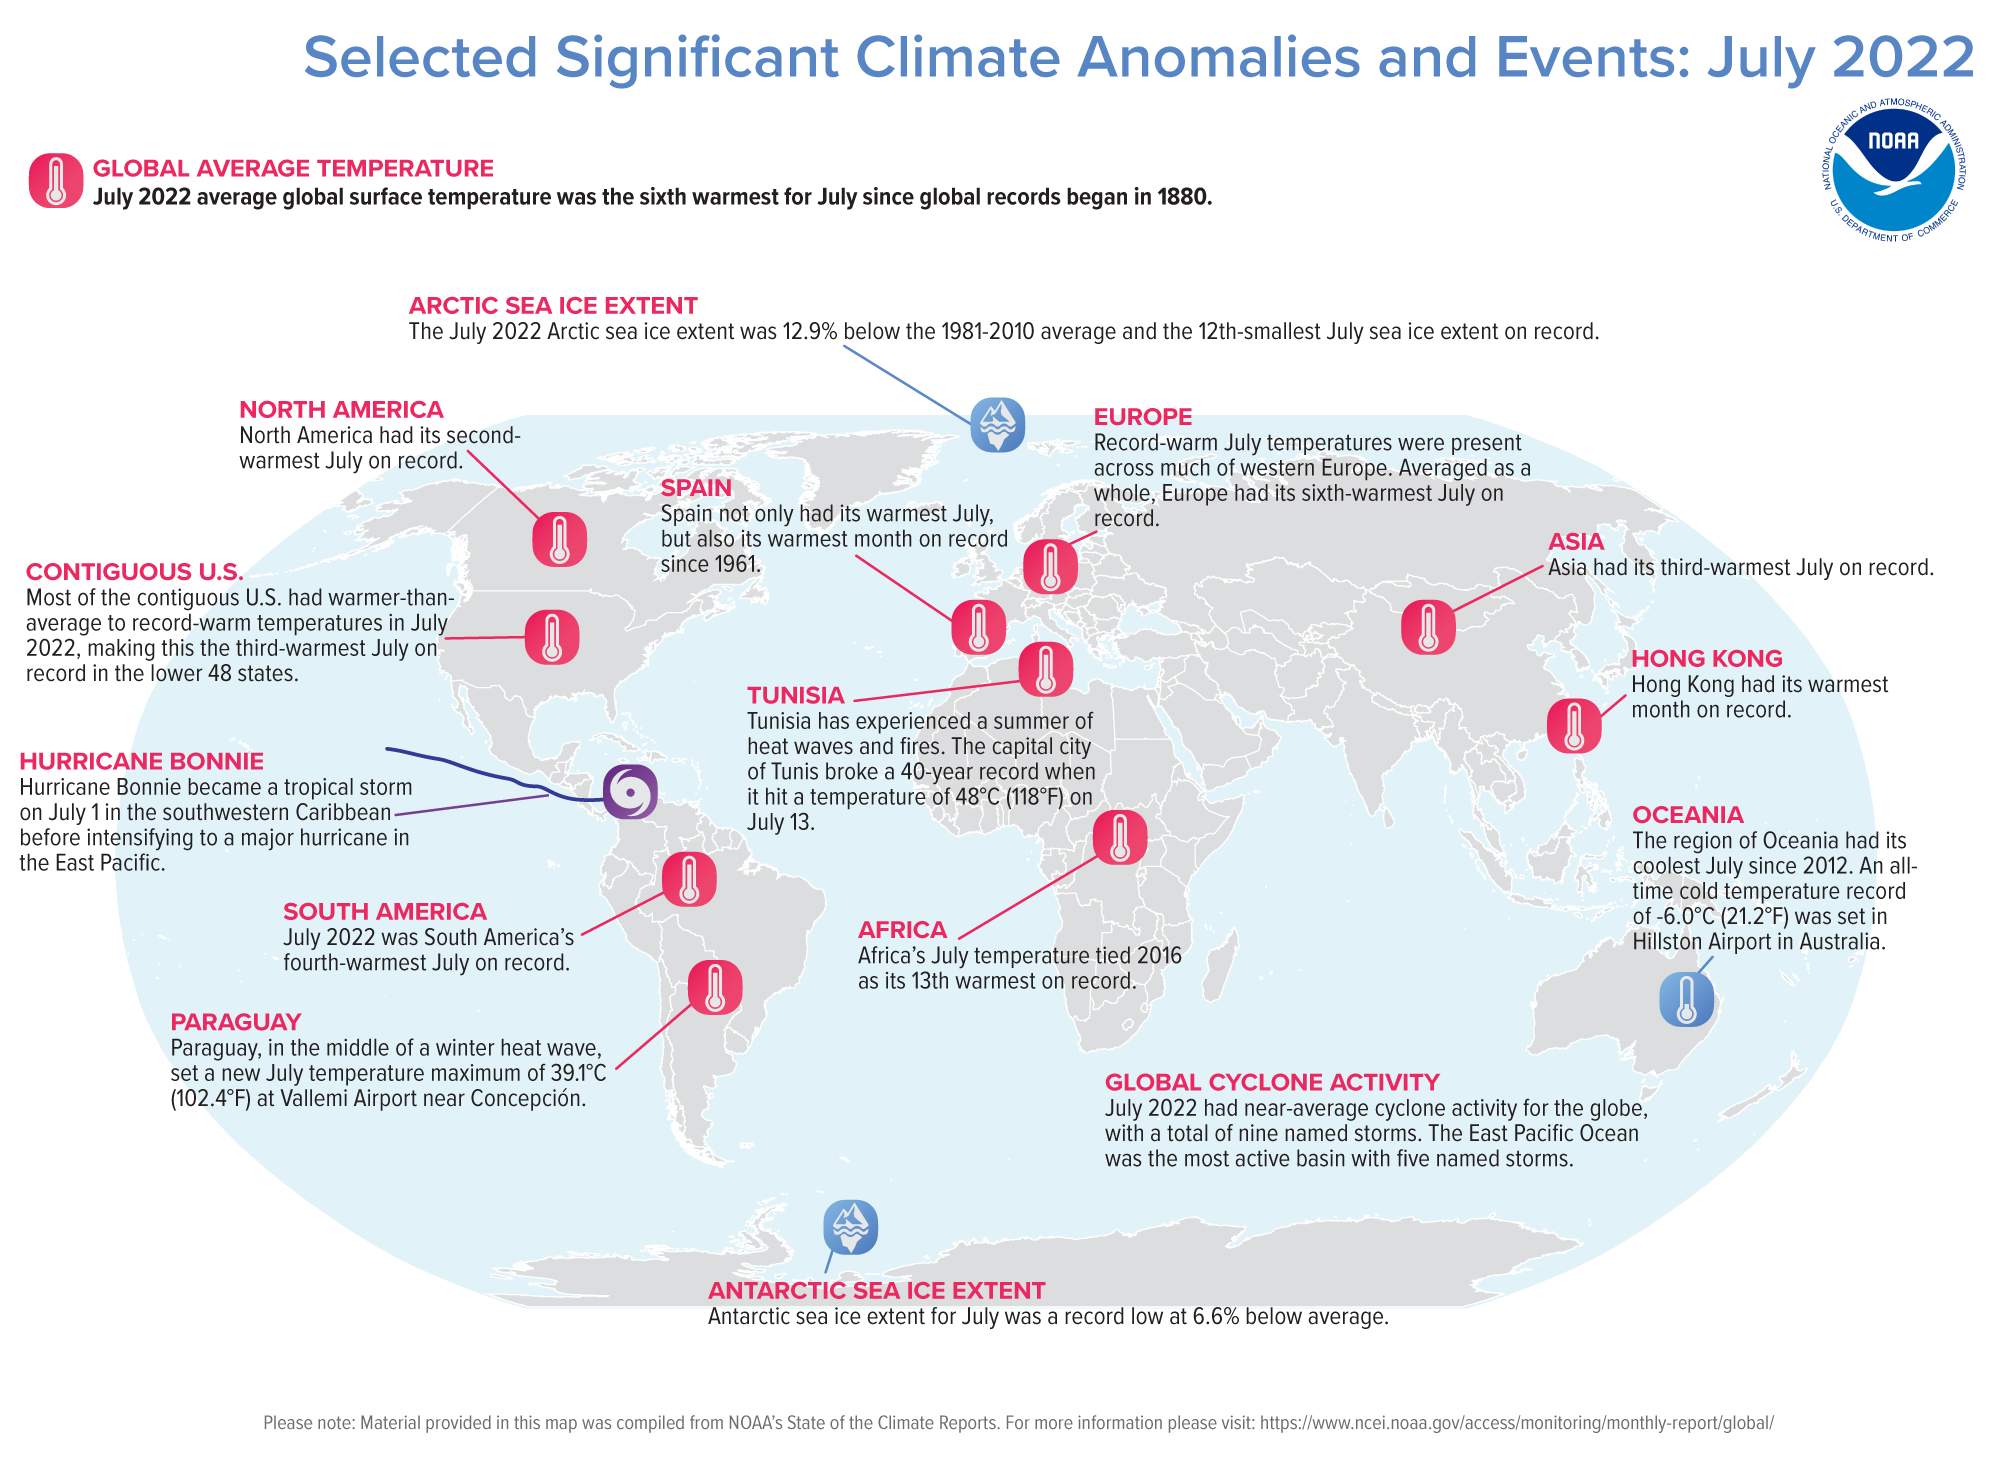 A map of the world plotted with some of the most significant climate events that occurred during July 2022.